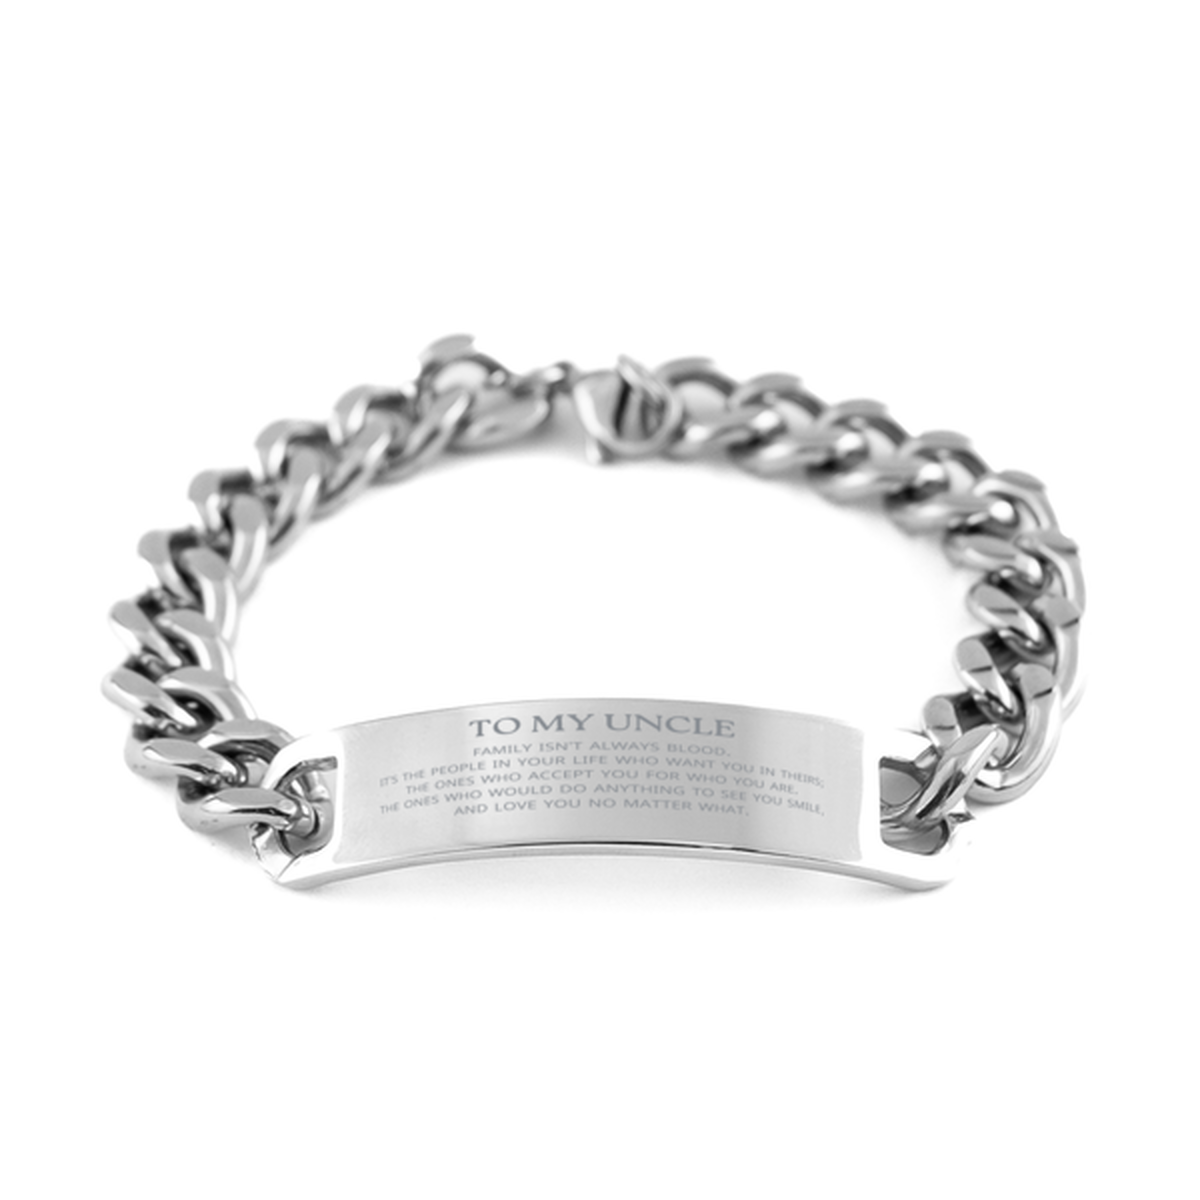 To My Uncle Gifts, Family isn't always blood, Uncle Cuban Chain Stainless Steel Bracelet, Birthday Christmas Unique Present For Uncle